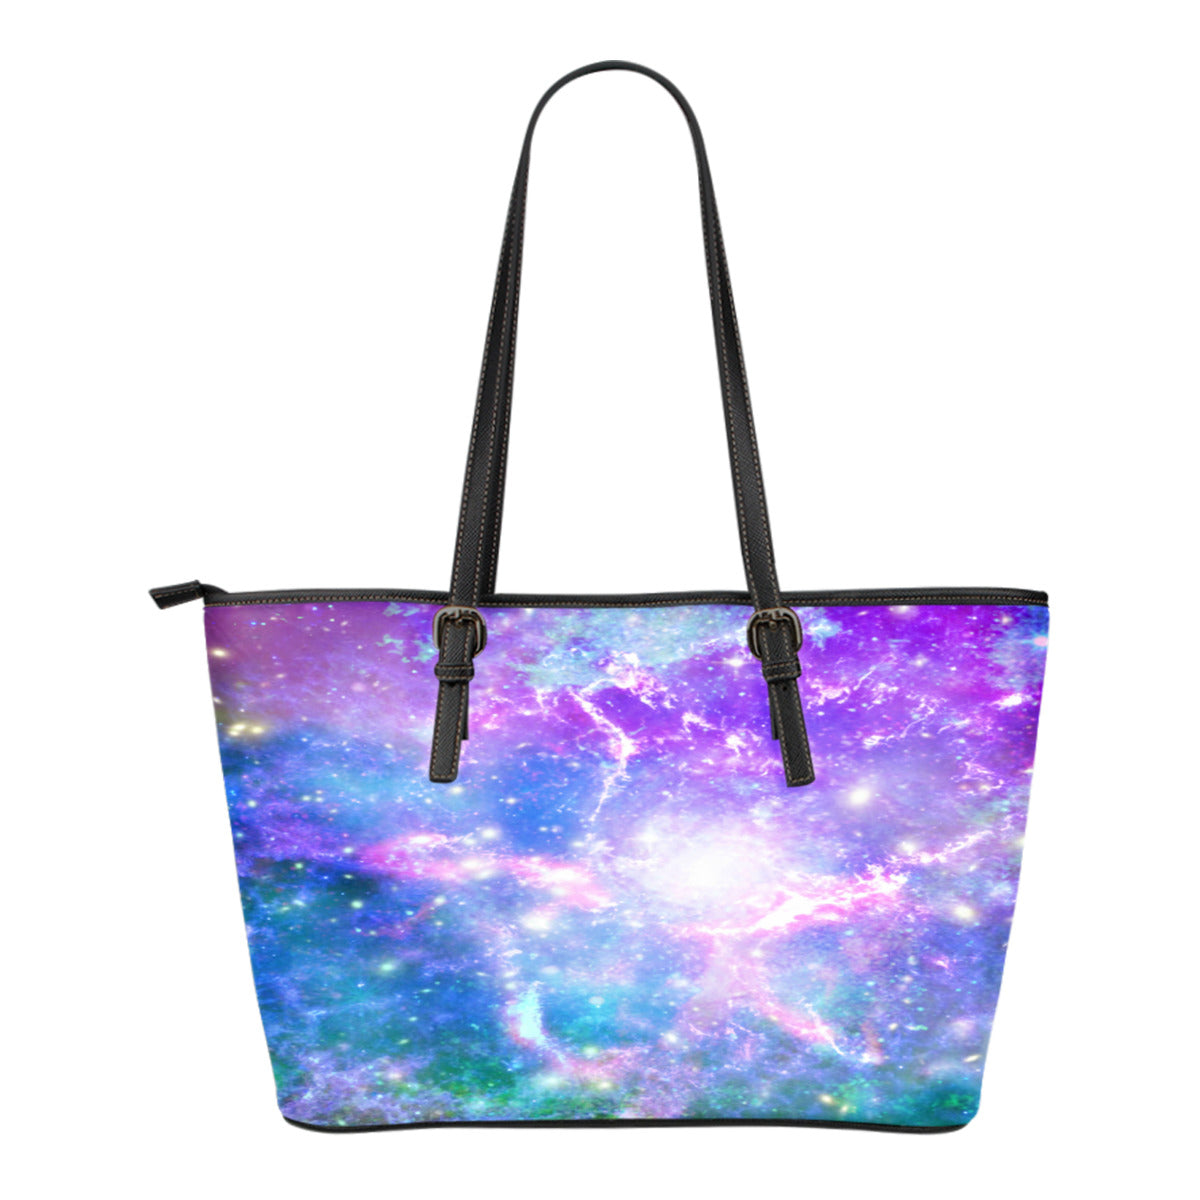 Pastel Galaxy Themed Design C5 Women Small Leather Tote Bag